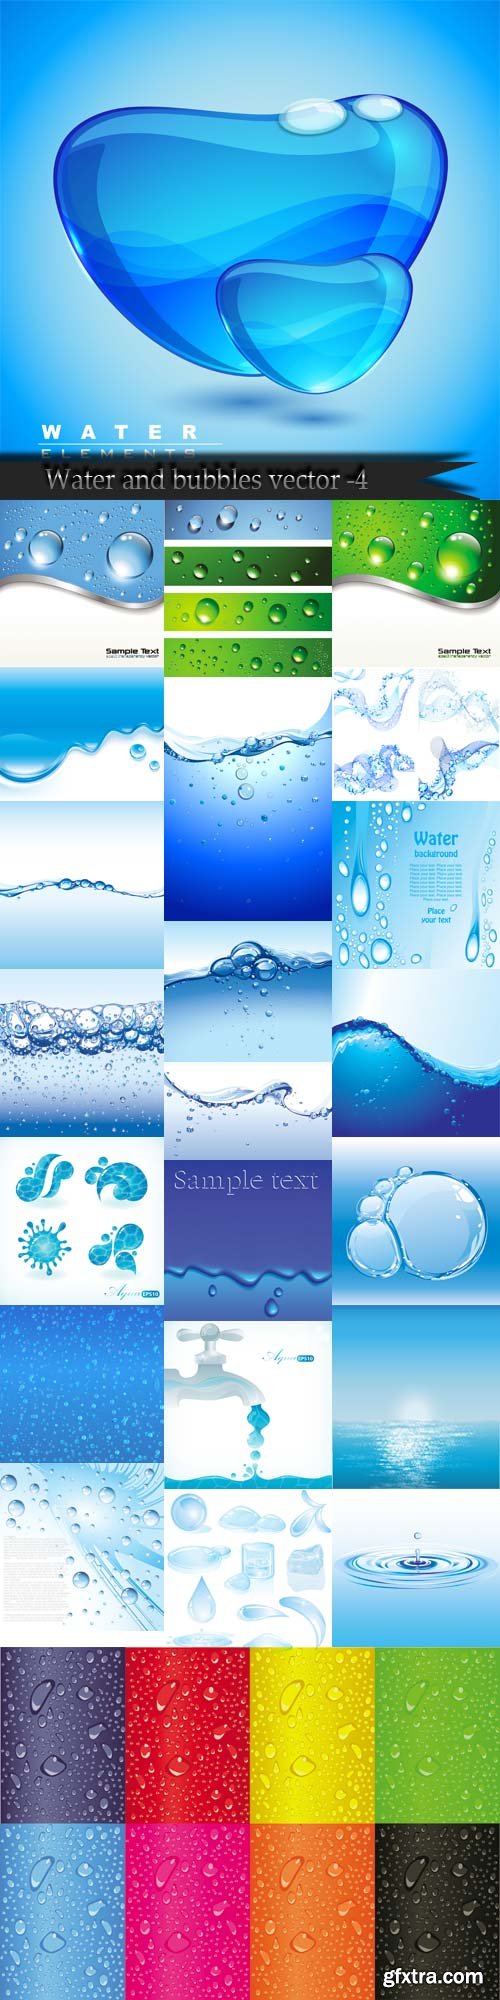 Water and bubbles vector -4